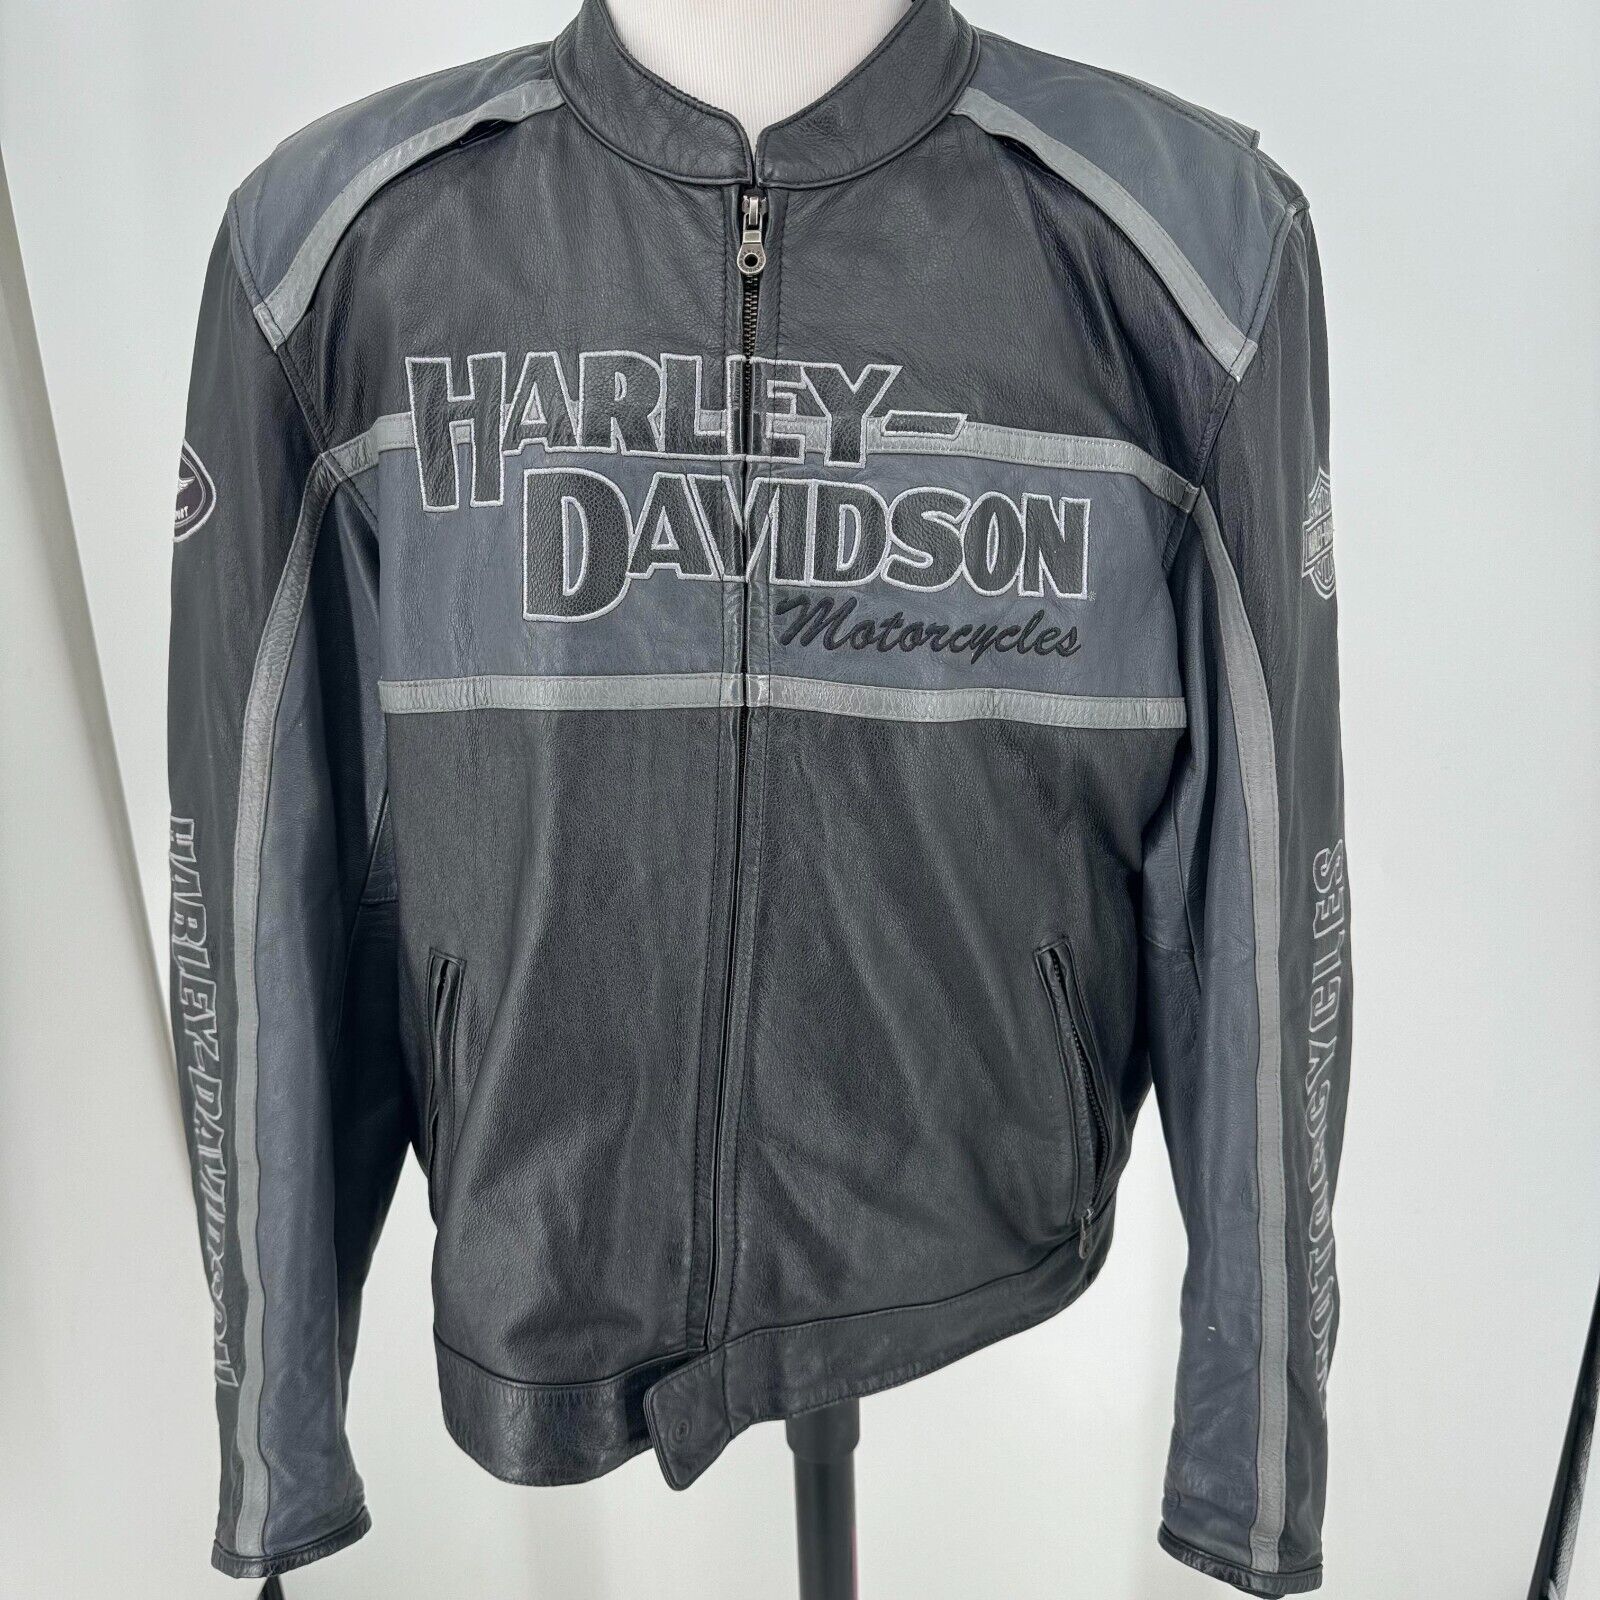 Harley Davidson Motorcycle Leather Riding Jacket Coat MENS Full Zip Lined 2XL